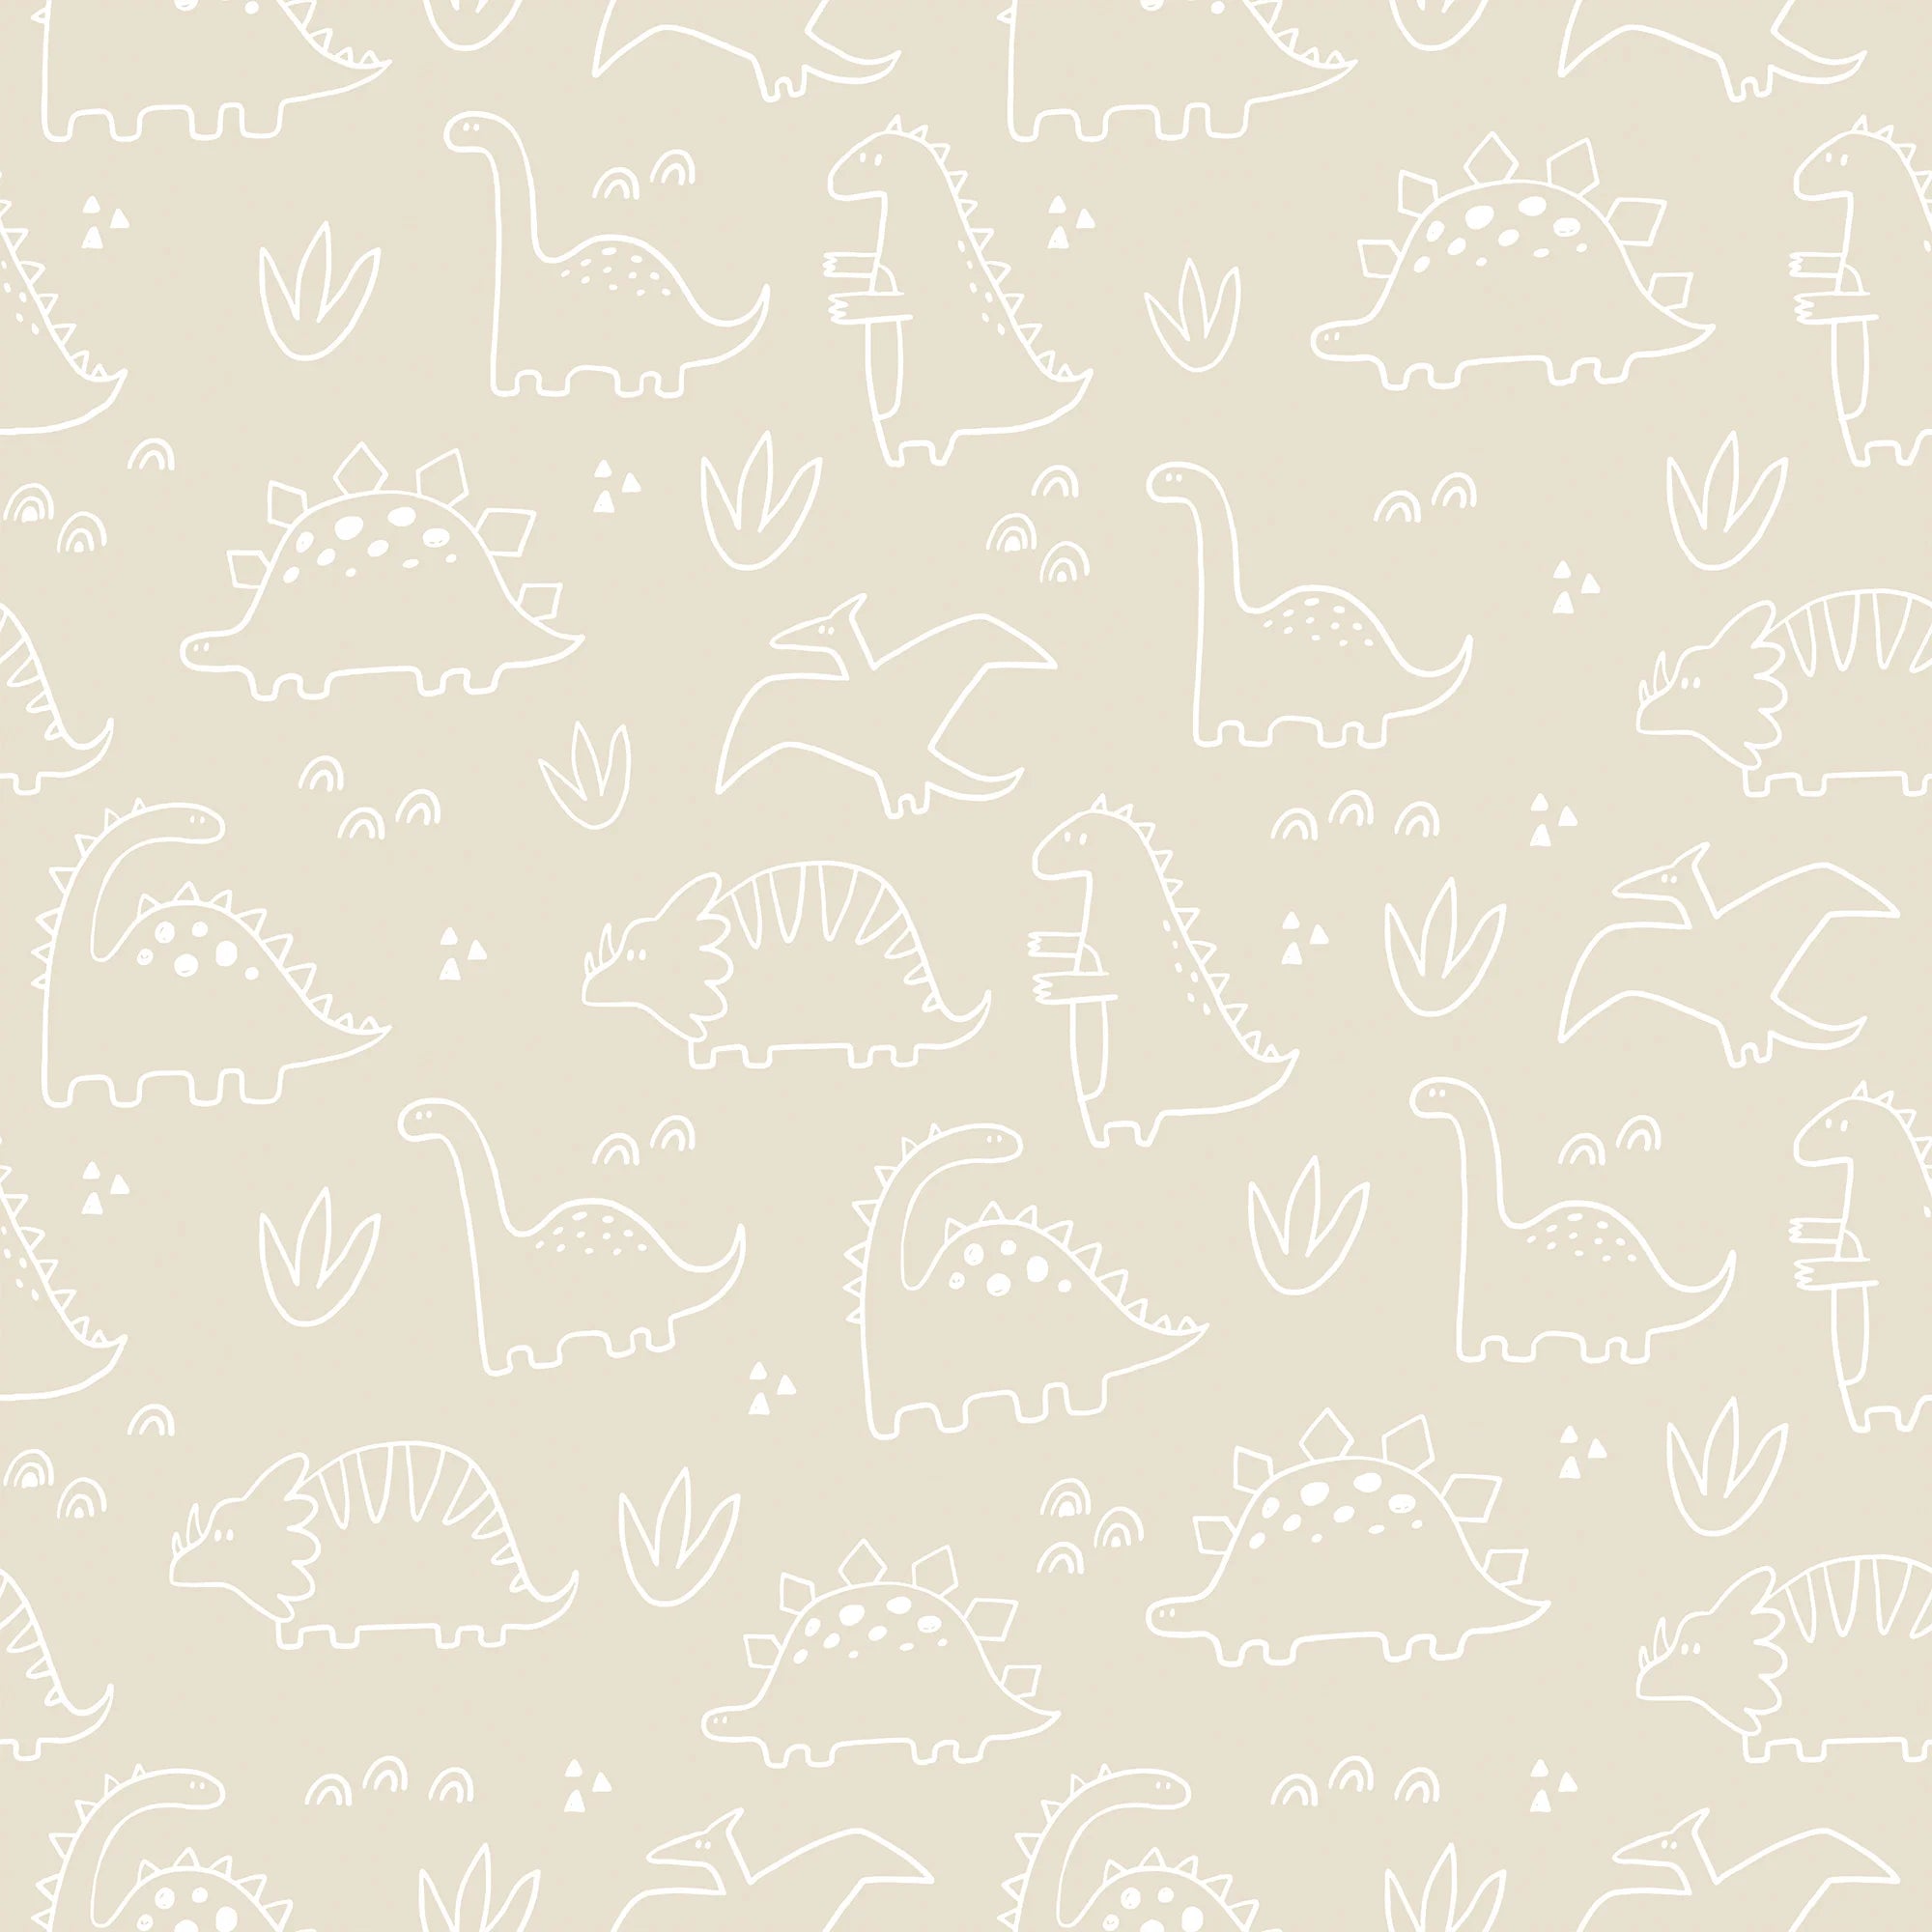 Dinky Dinos Wallpaper in Cream and White